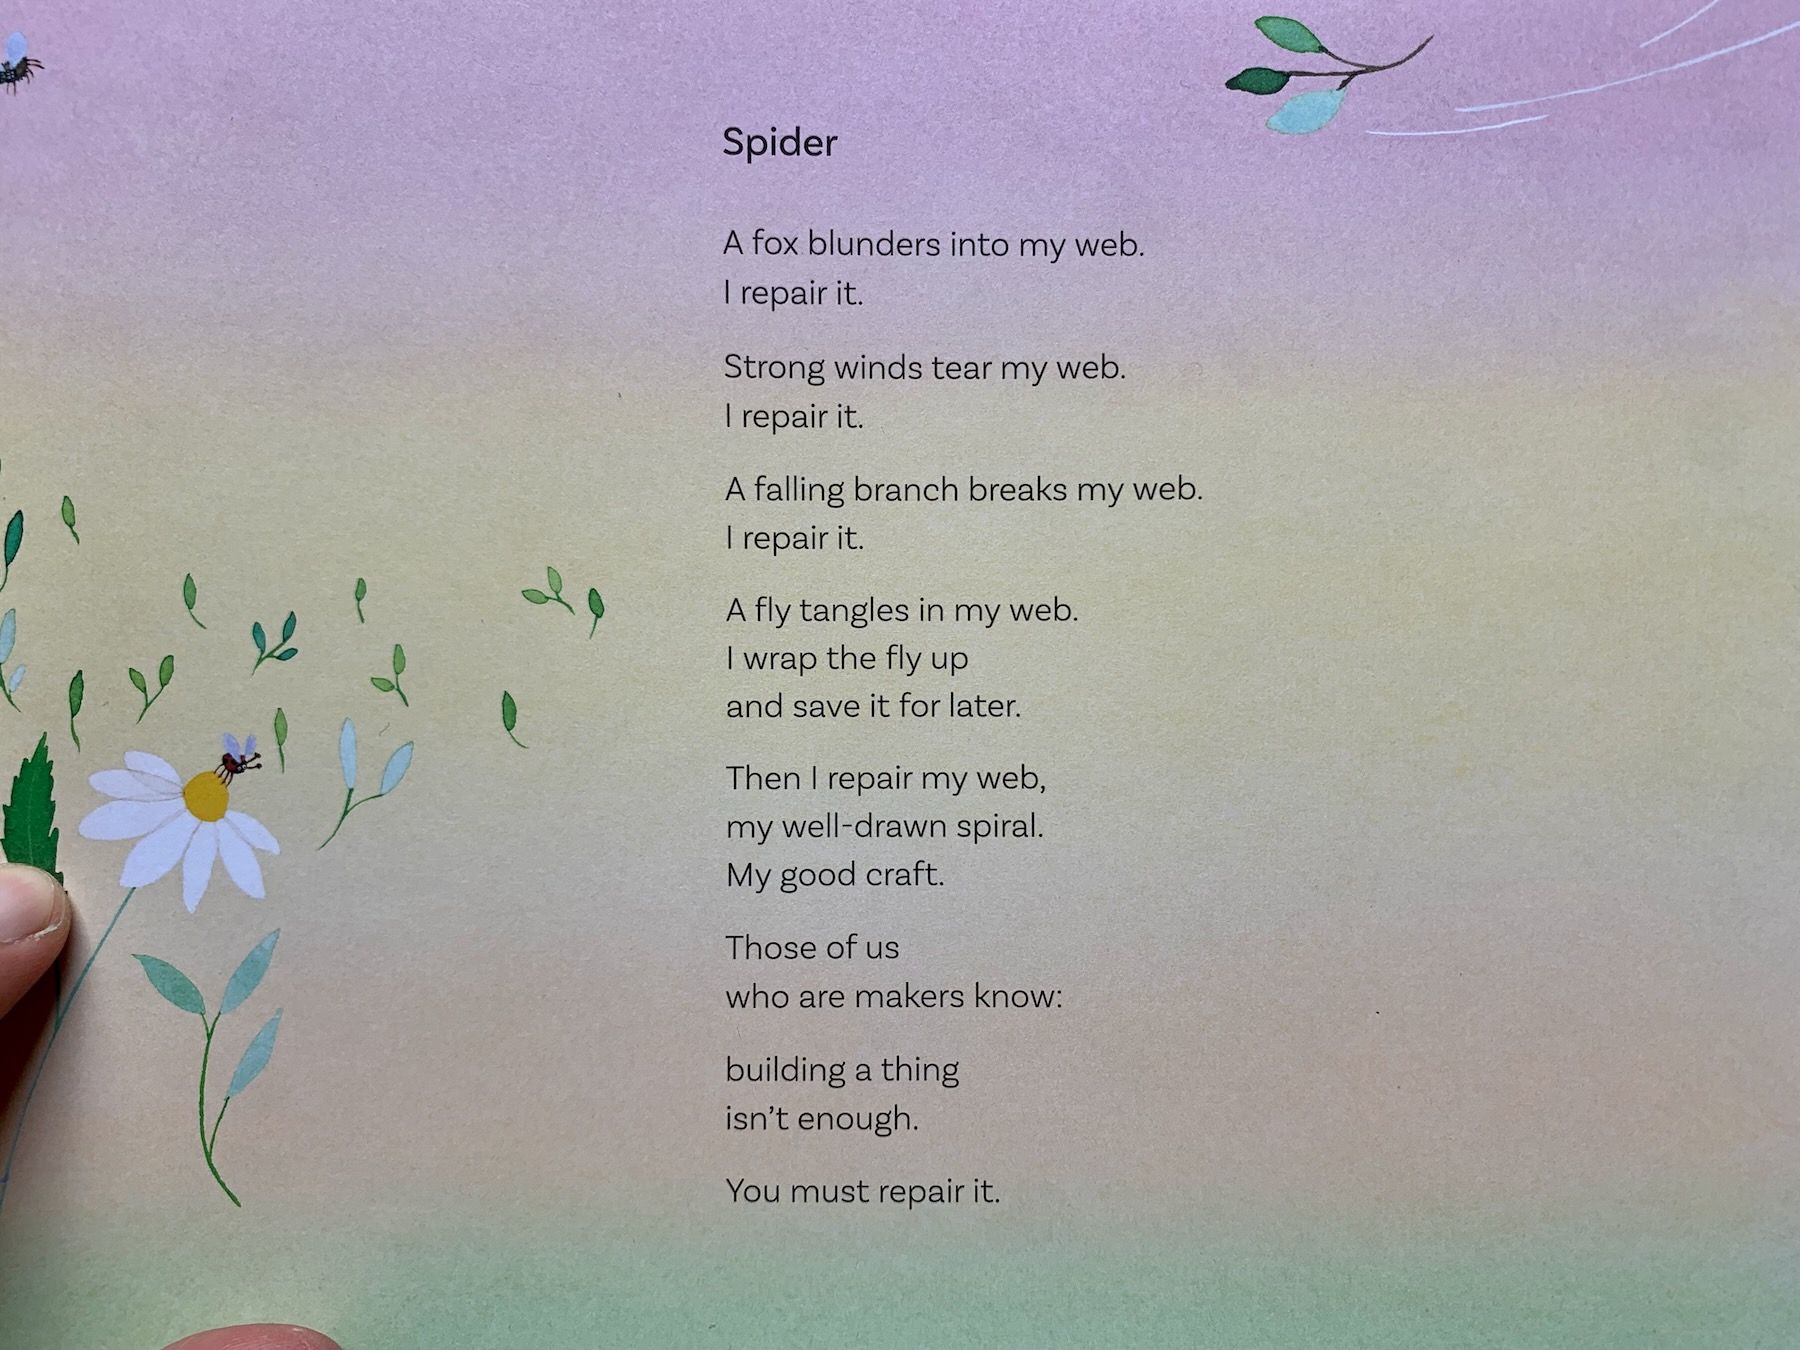 Poem titled “Spider”, ending with “Those of us / who are makers know: / building a thing isn’t enough. / You must repair it.